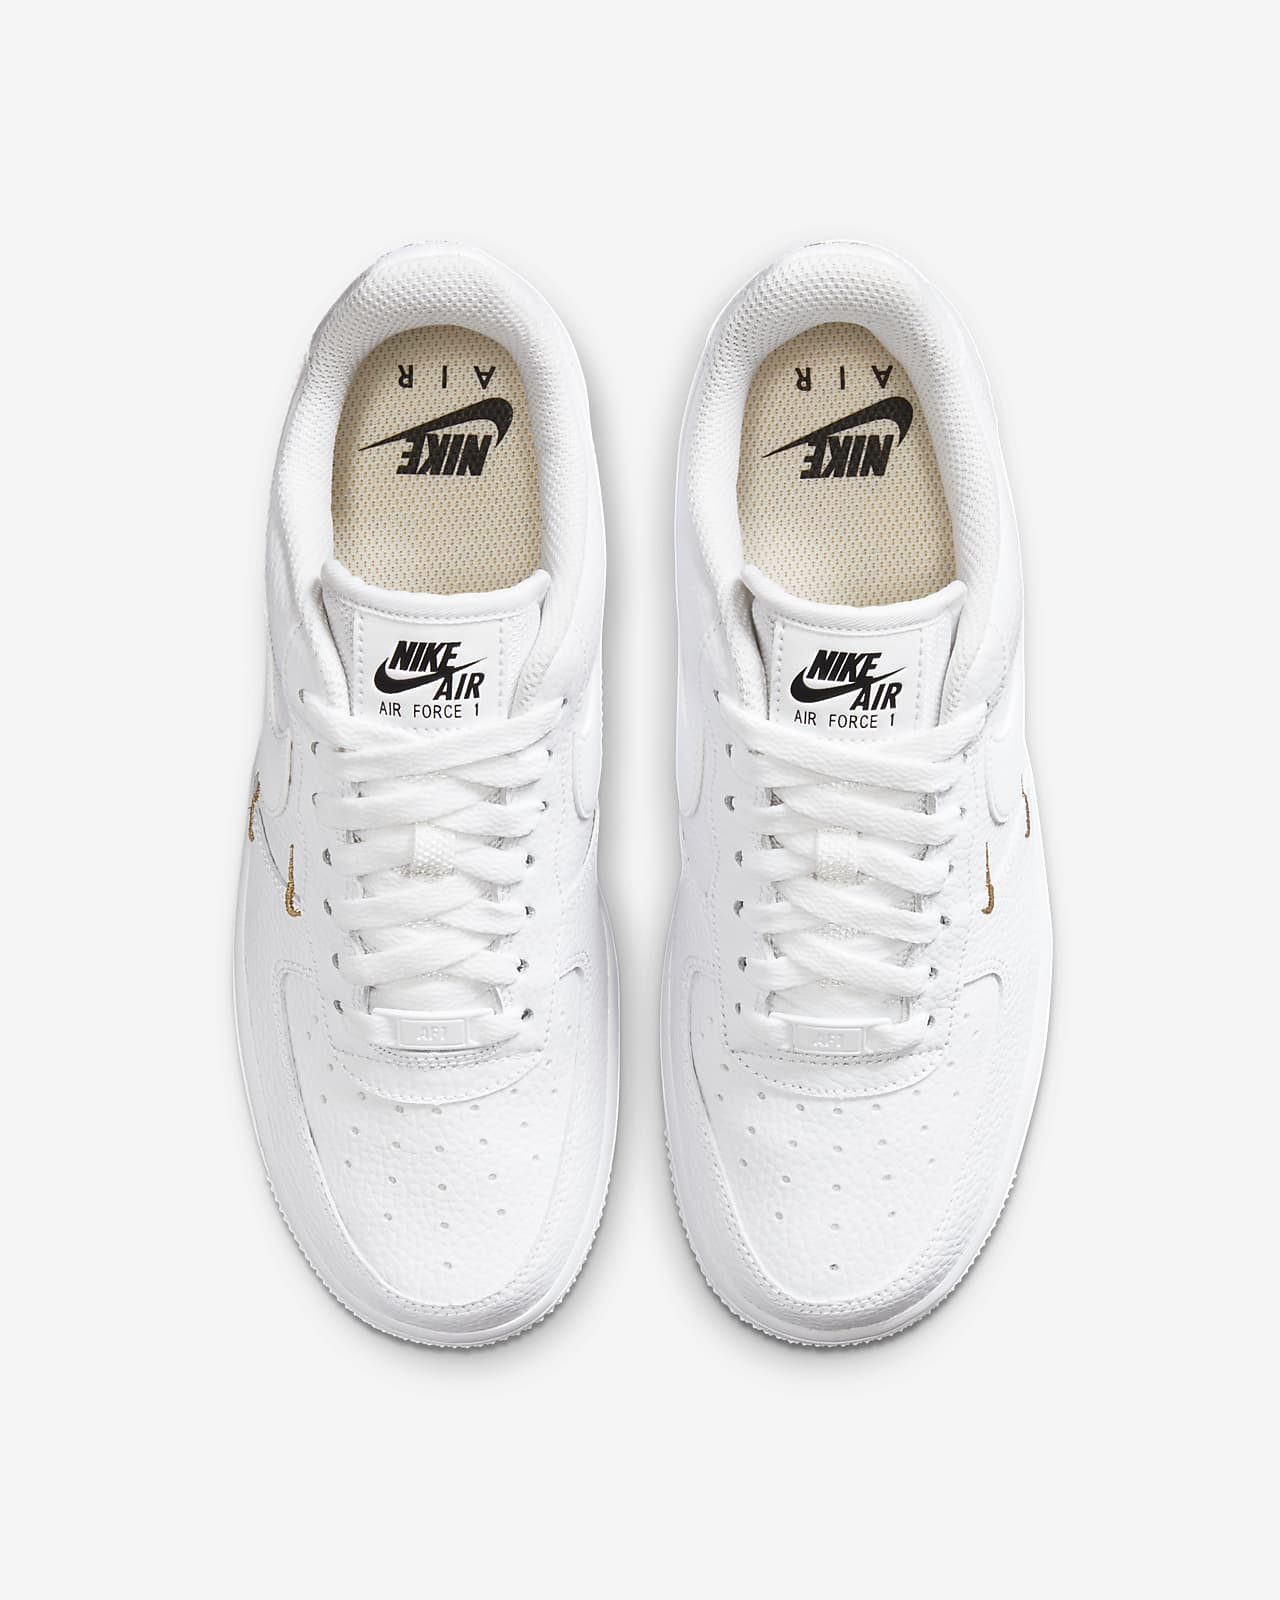 nike air force 1 07 women's white and gold